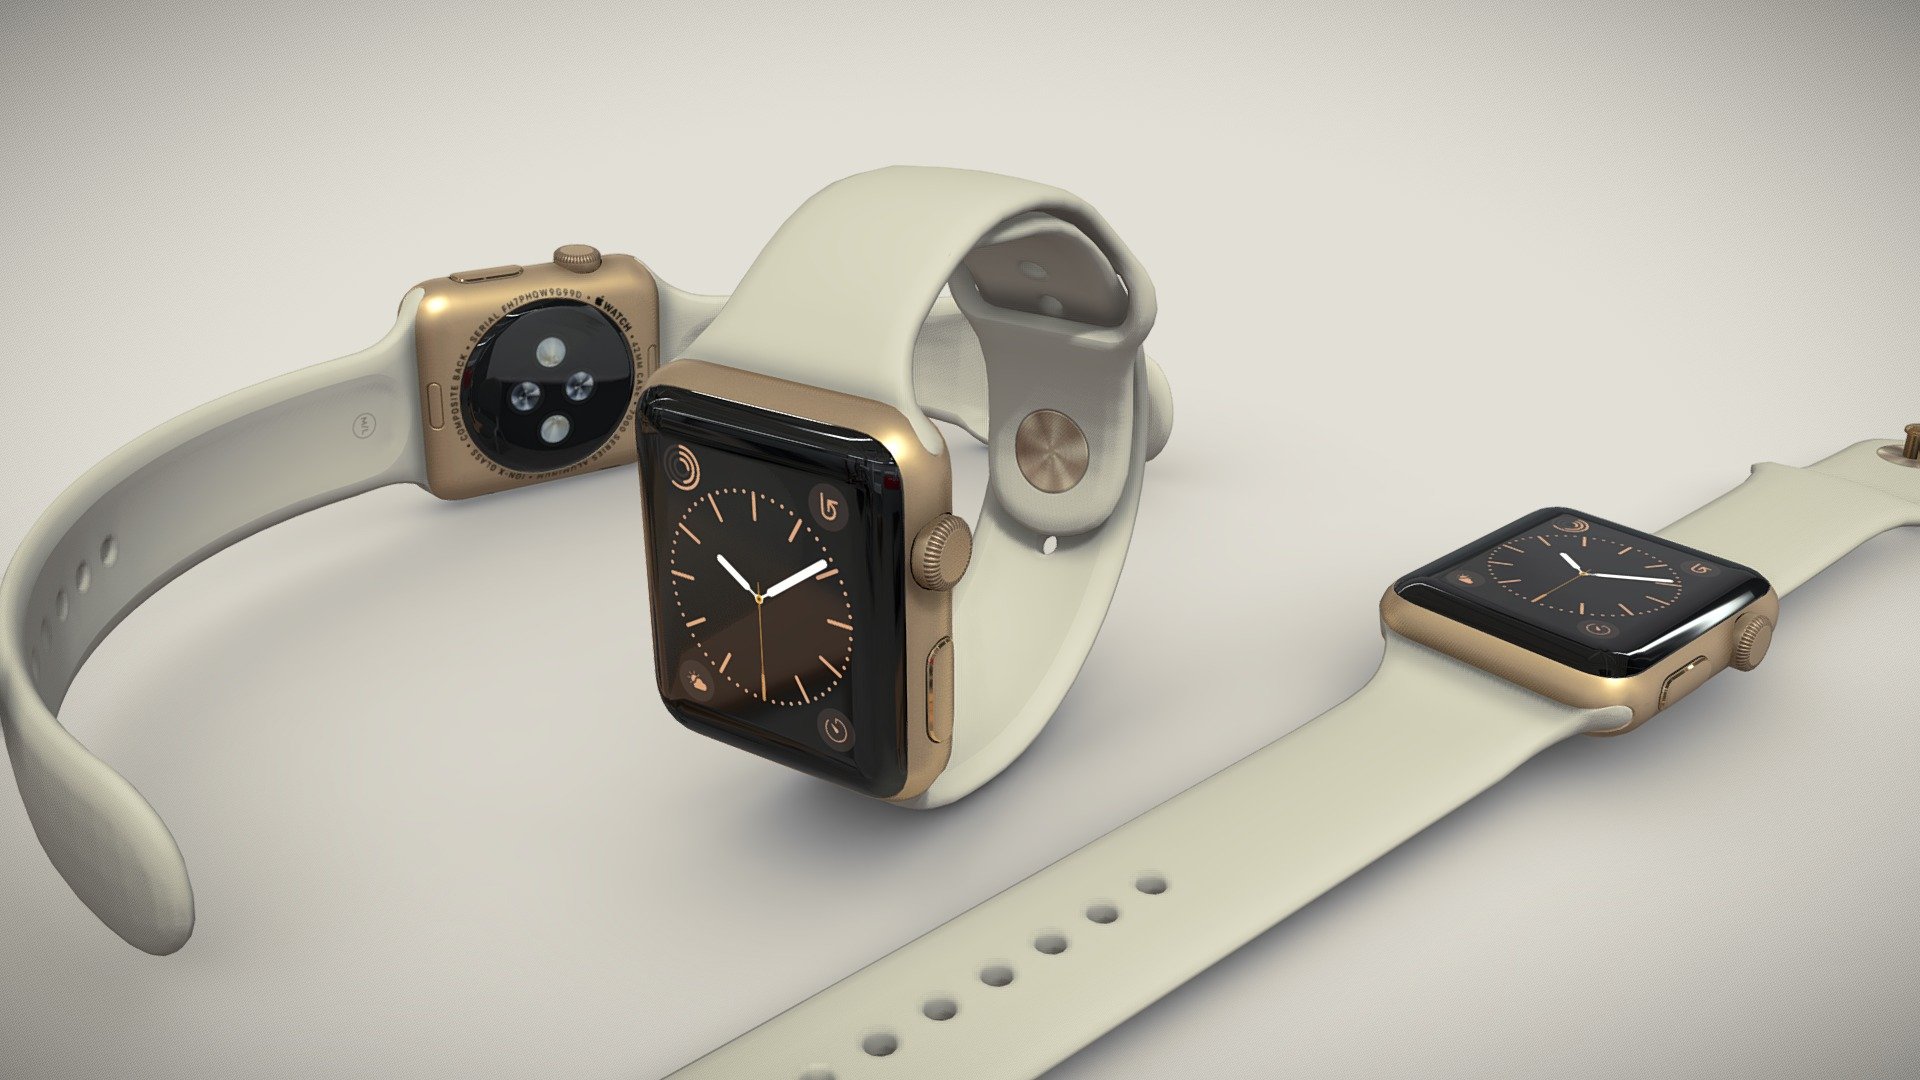 •   Let me present to you high-quality low-poly 3D model Apple Watch 42mm Gold Aluminum Case with Antique White Sport Band. Modeling was made with ortho-photos of real watch that is why all details of design are recreated most authentically.

•    This model consists of two meshes, it is low-polygonal and it has only one material. 

•   The total of the main textures is 5. Resolution of all textures is 4096 pixels square aspect ratio in .png format. Also there is original texture file .PSD format in separate archive.

•   Polygon count of the model is – 4294.

•   The model has correct dimensions in real-world scale. All parts grouped and named correctly.

•   To use the model in other 3D programs there are scenes saved in formats .fbx, .obj, .DAE, .max (2010 version).

Note: If you see some artifacts on the textures, it means compression works in the Viewer. We recommend setting HD quality for textures. But anyway, original textures have no artifacts 3d model